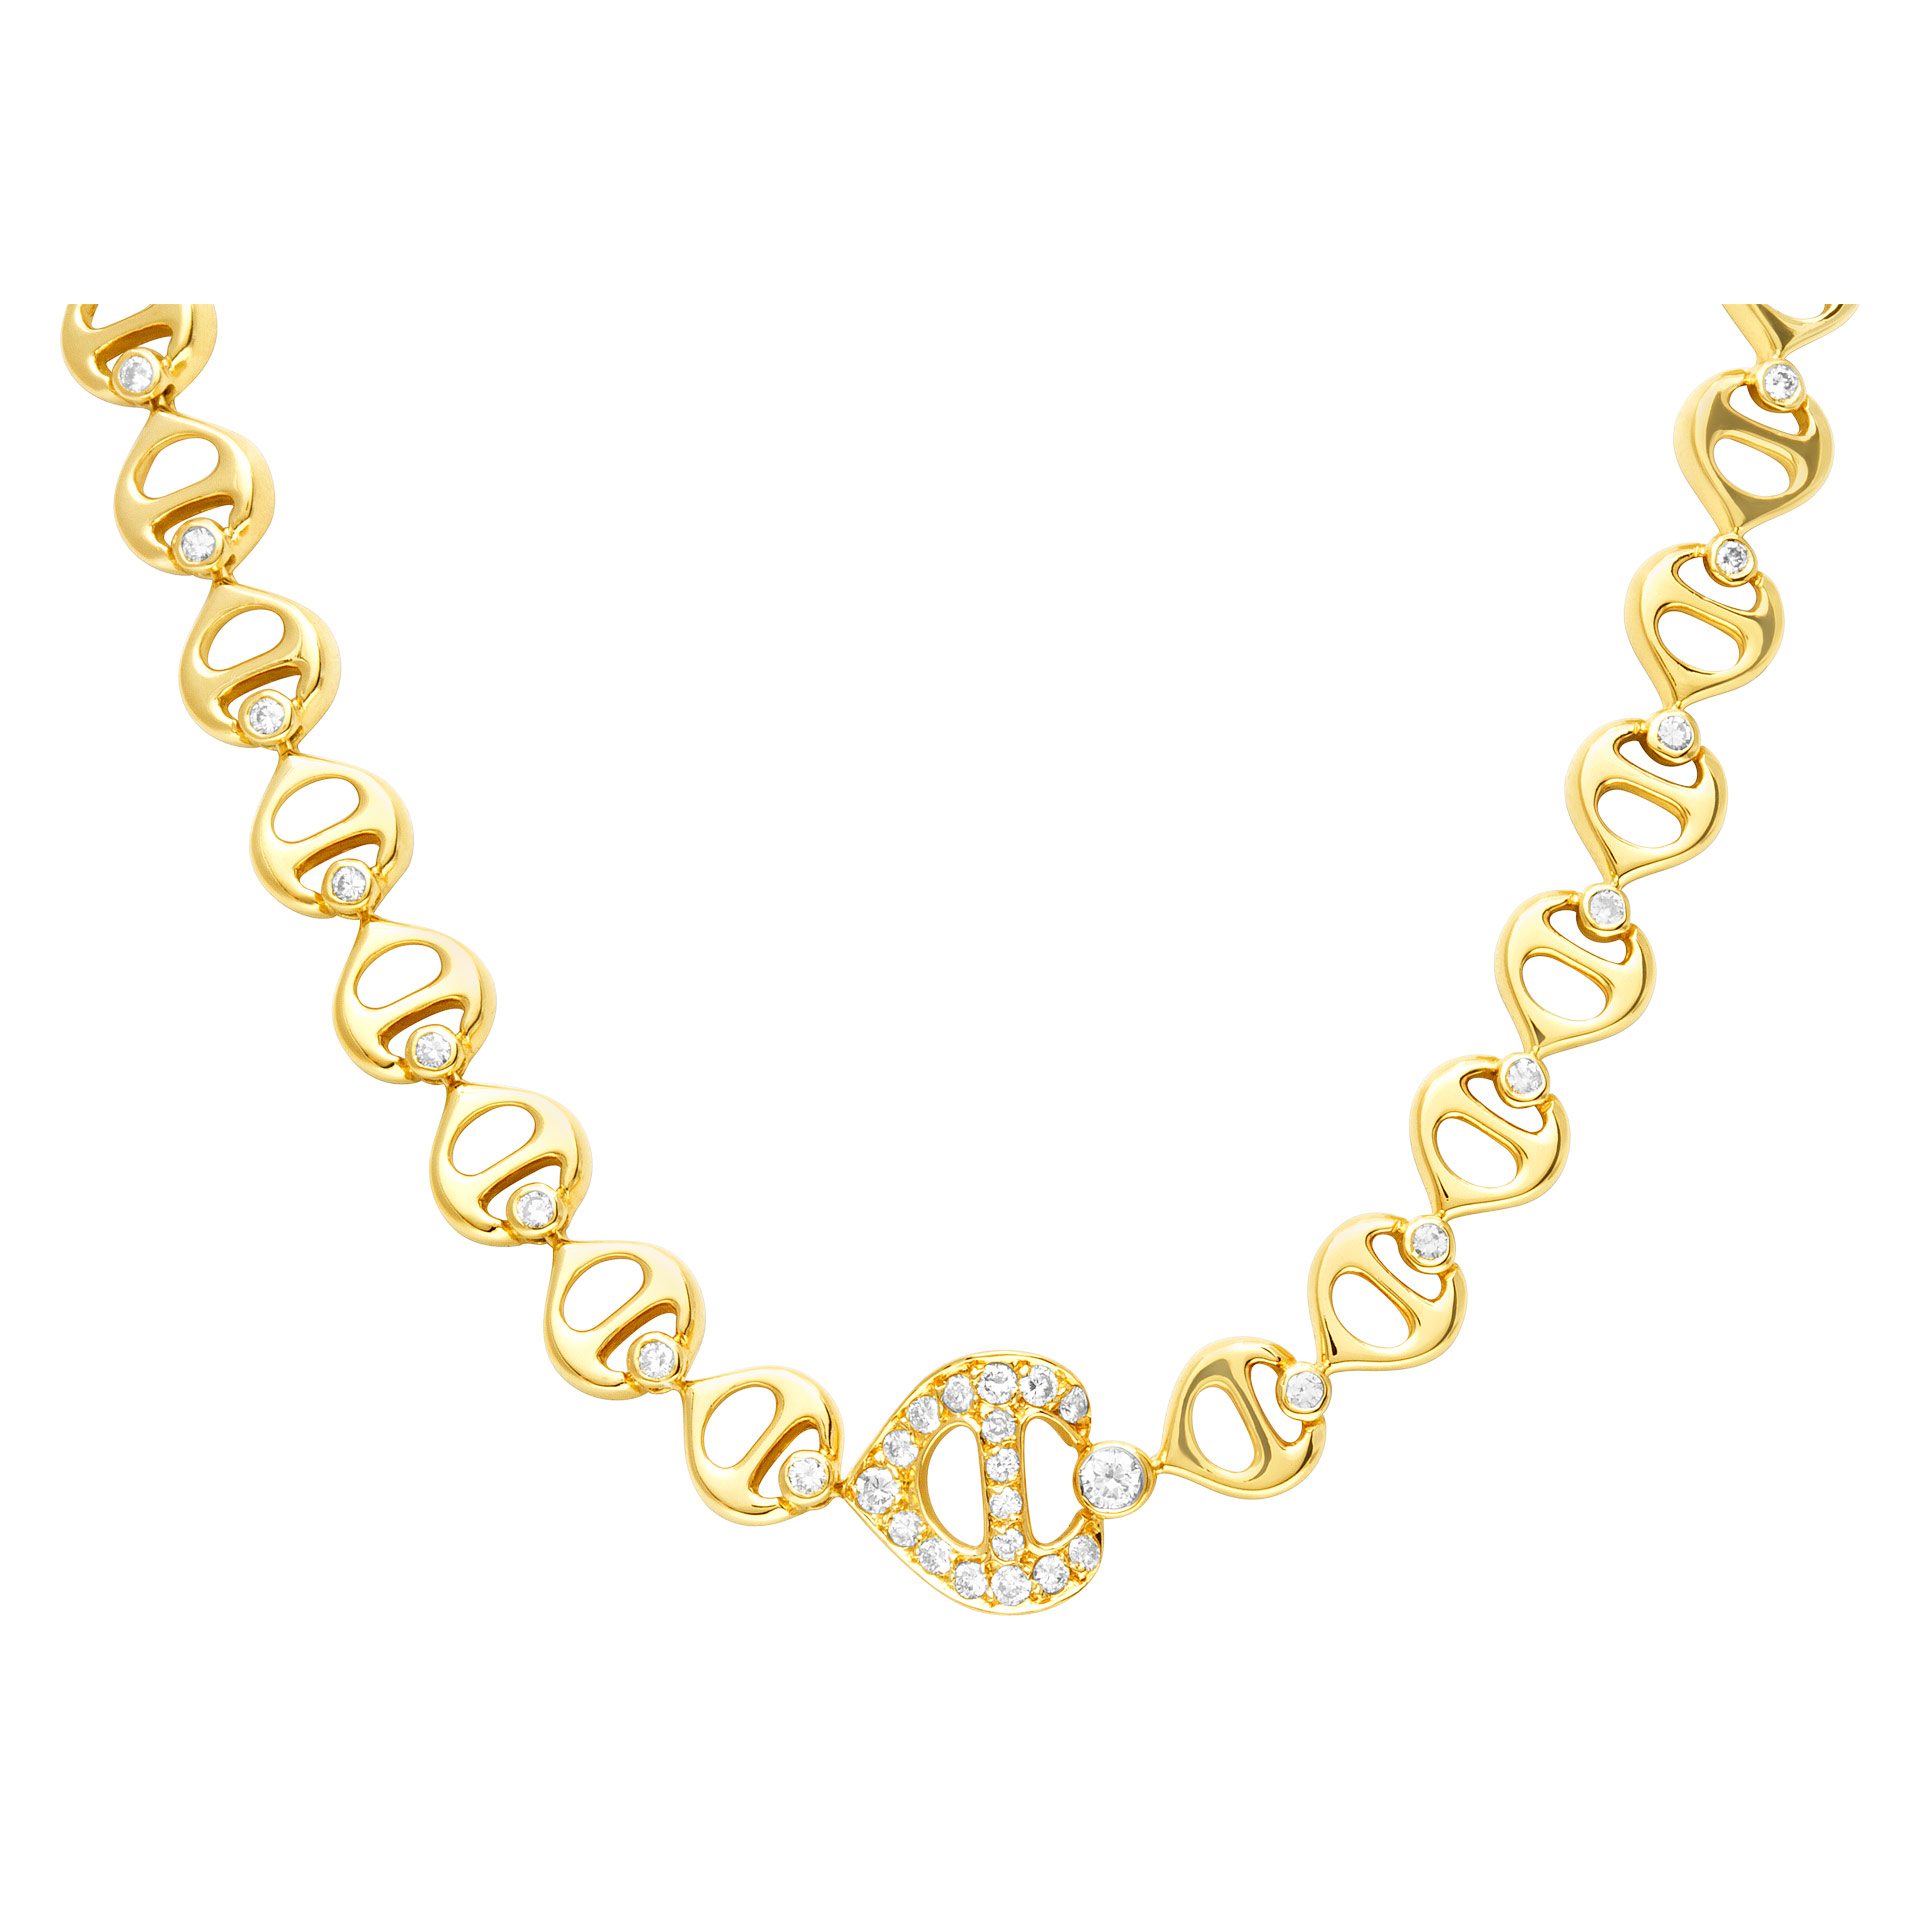 Choker necklace in 18k yellow gold with over 1.00 carats in  round diamonds image 1